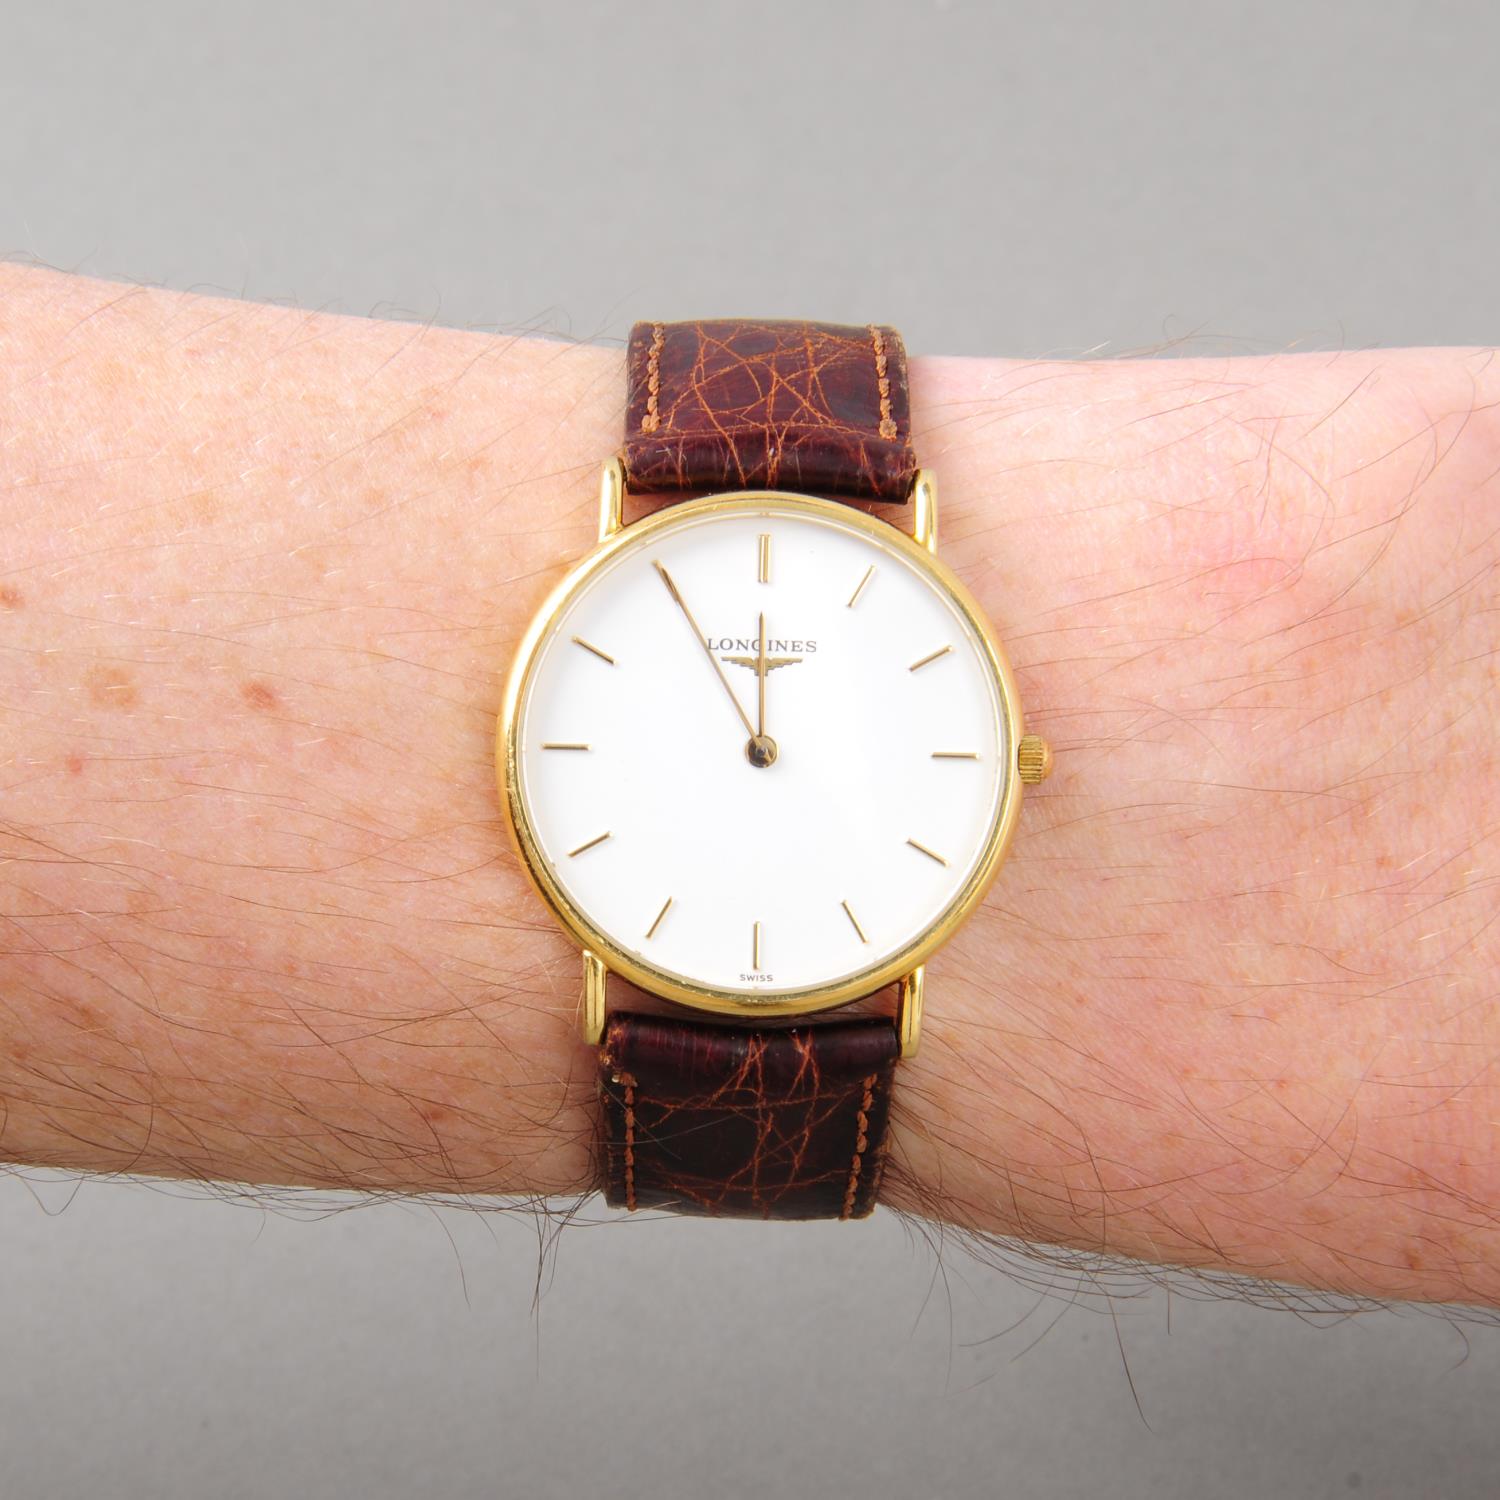 LONGINES - a gentleman's wrist watch. 18ct yellow gold case with engraved case back. Reference L7. - Image 3 of 5